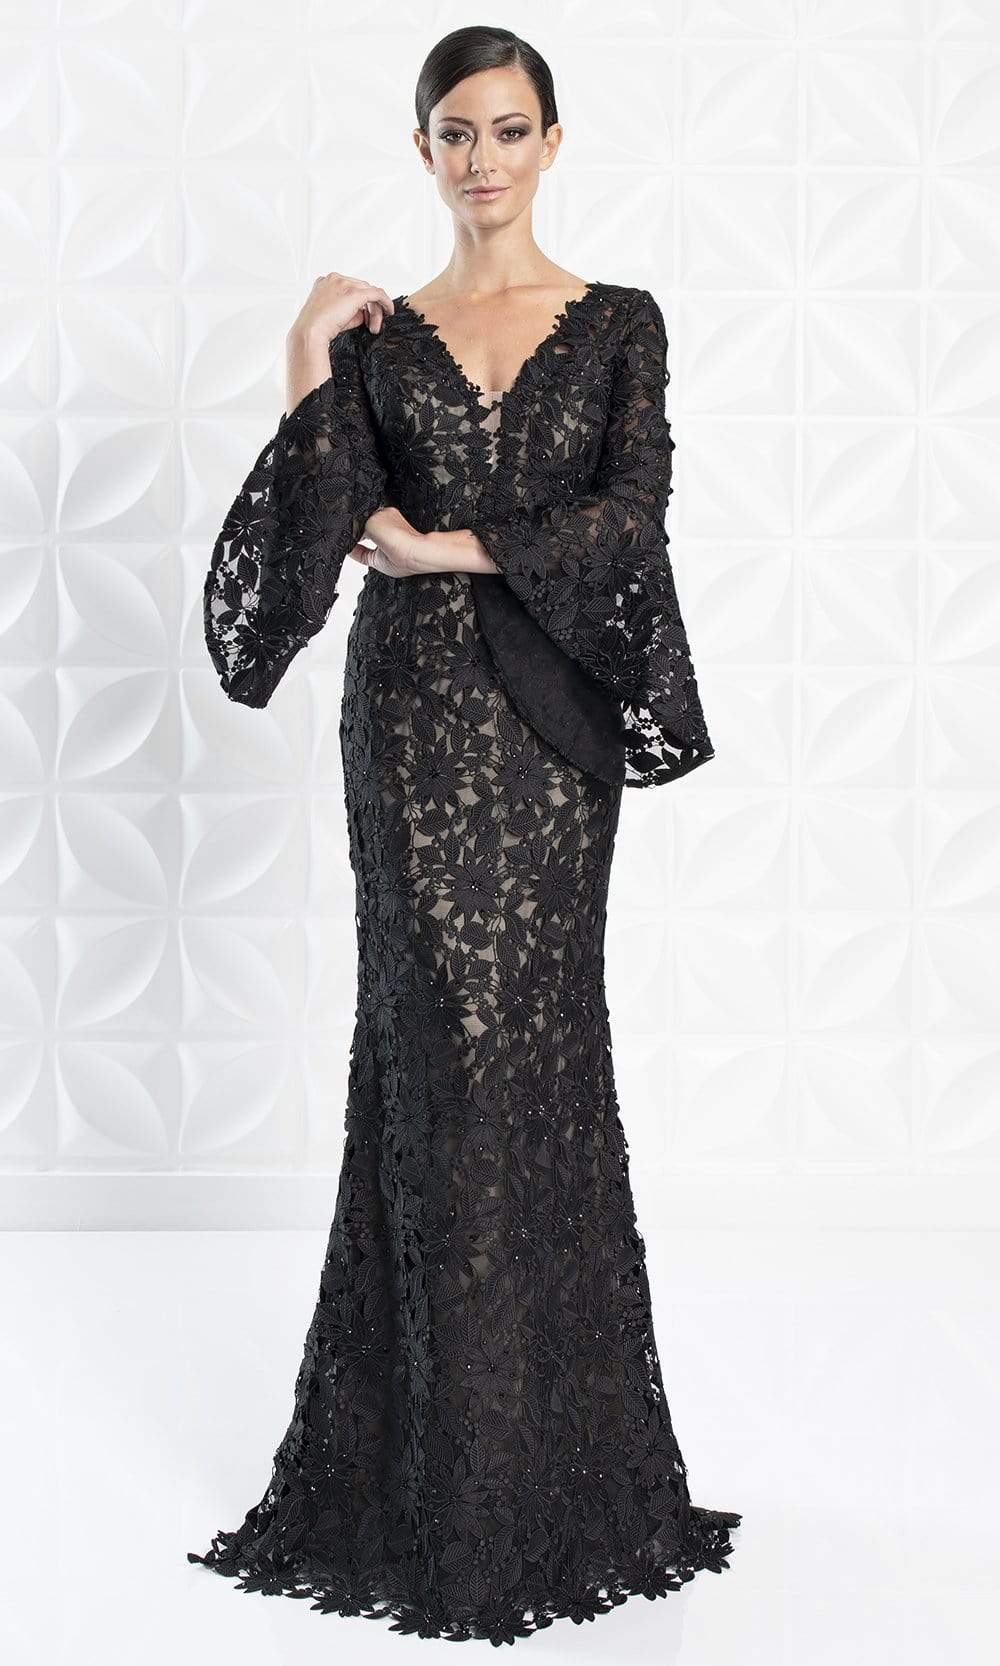 Alexander By Daymor - 1276 Circular Flounce V-Neck Floral Lace Gown Mother of the Bride Dresses 6 / Black